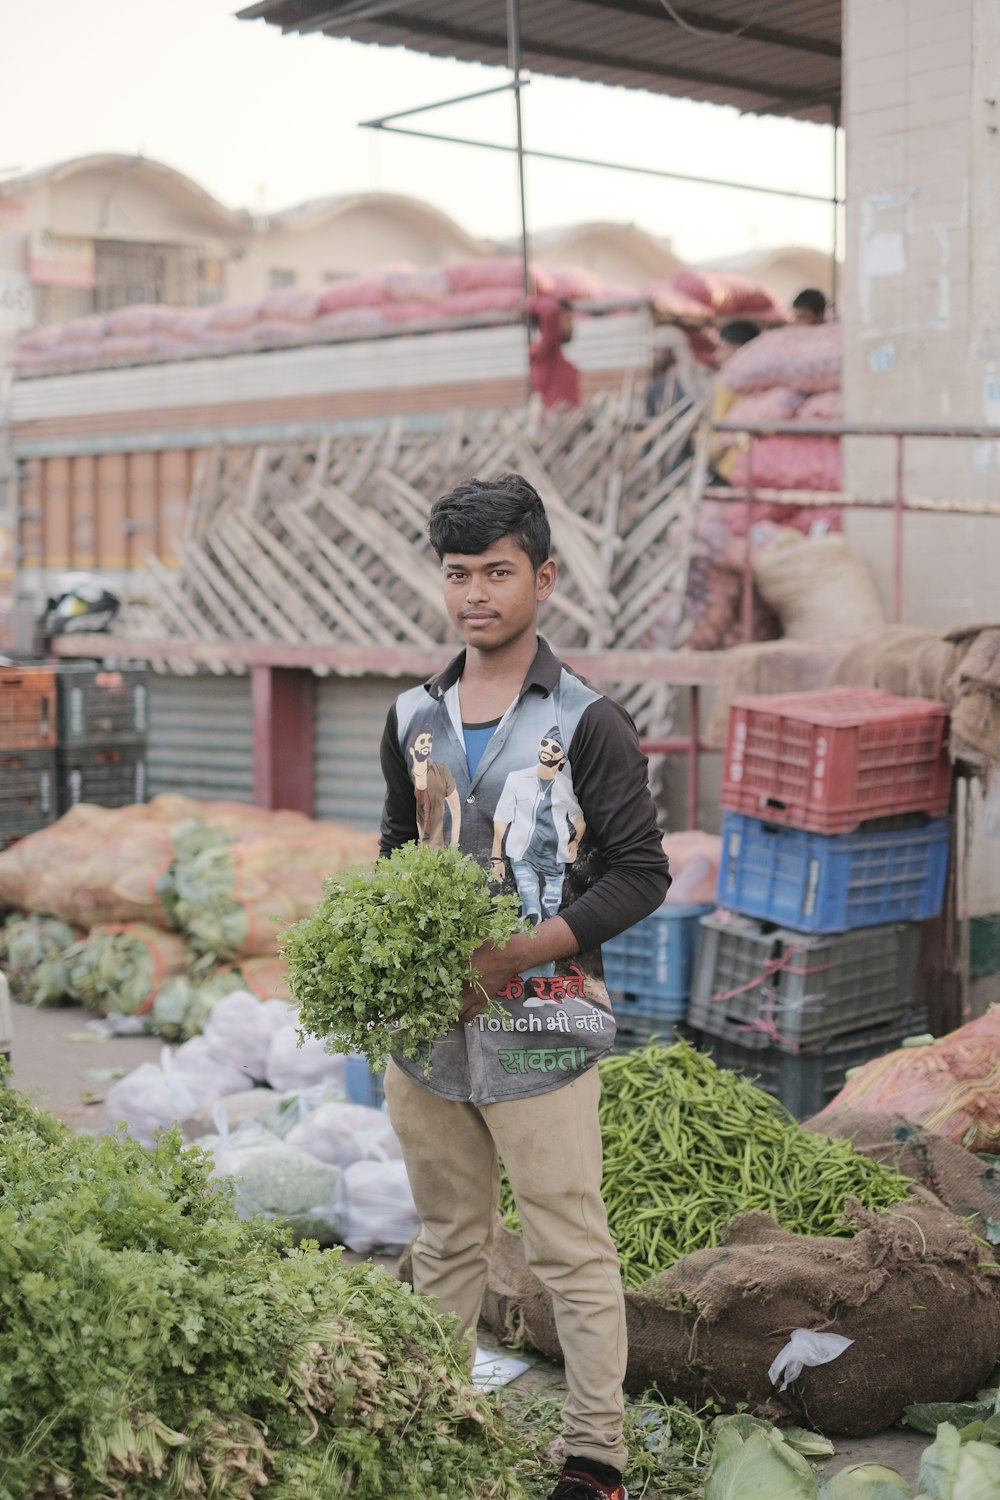 a young boy holding a bunch of green vegetables